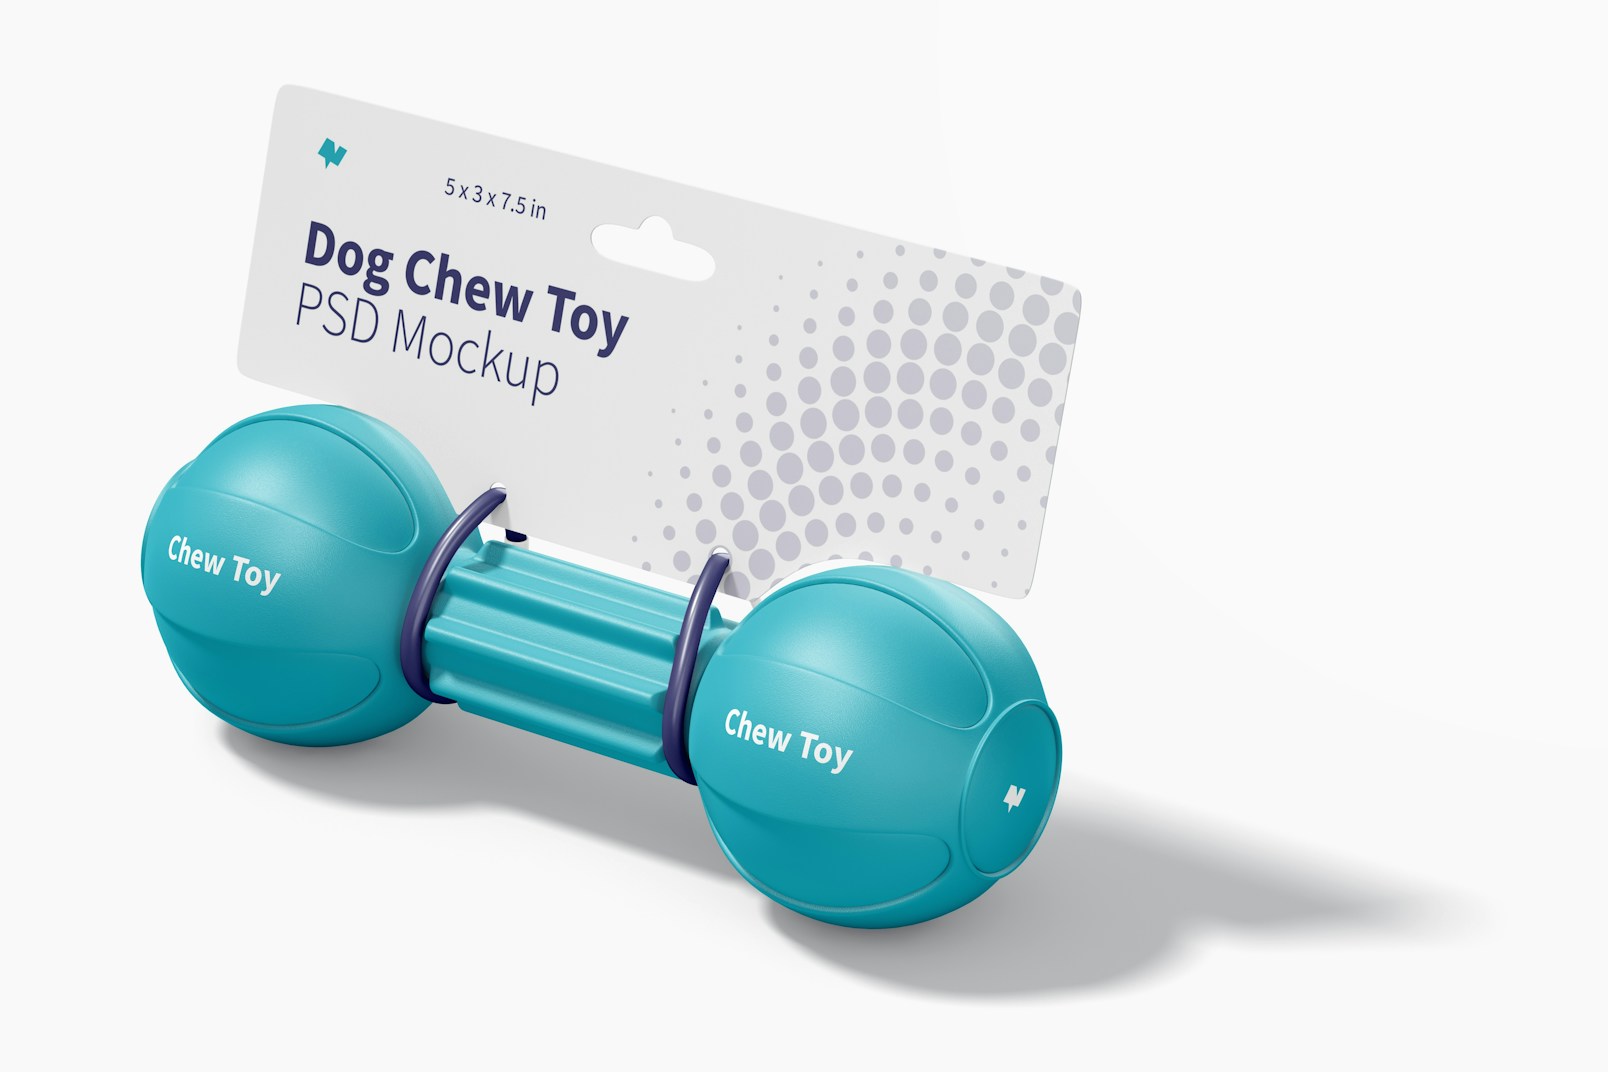 Dog Barbell Chew Toy Packaging Mockup